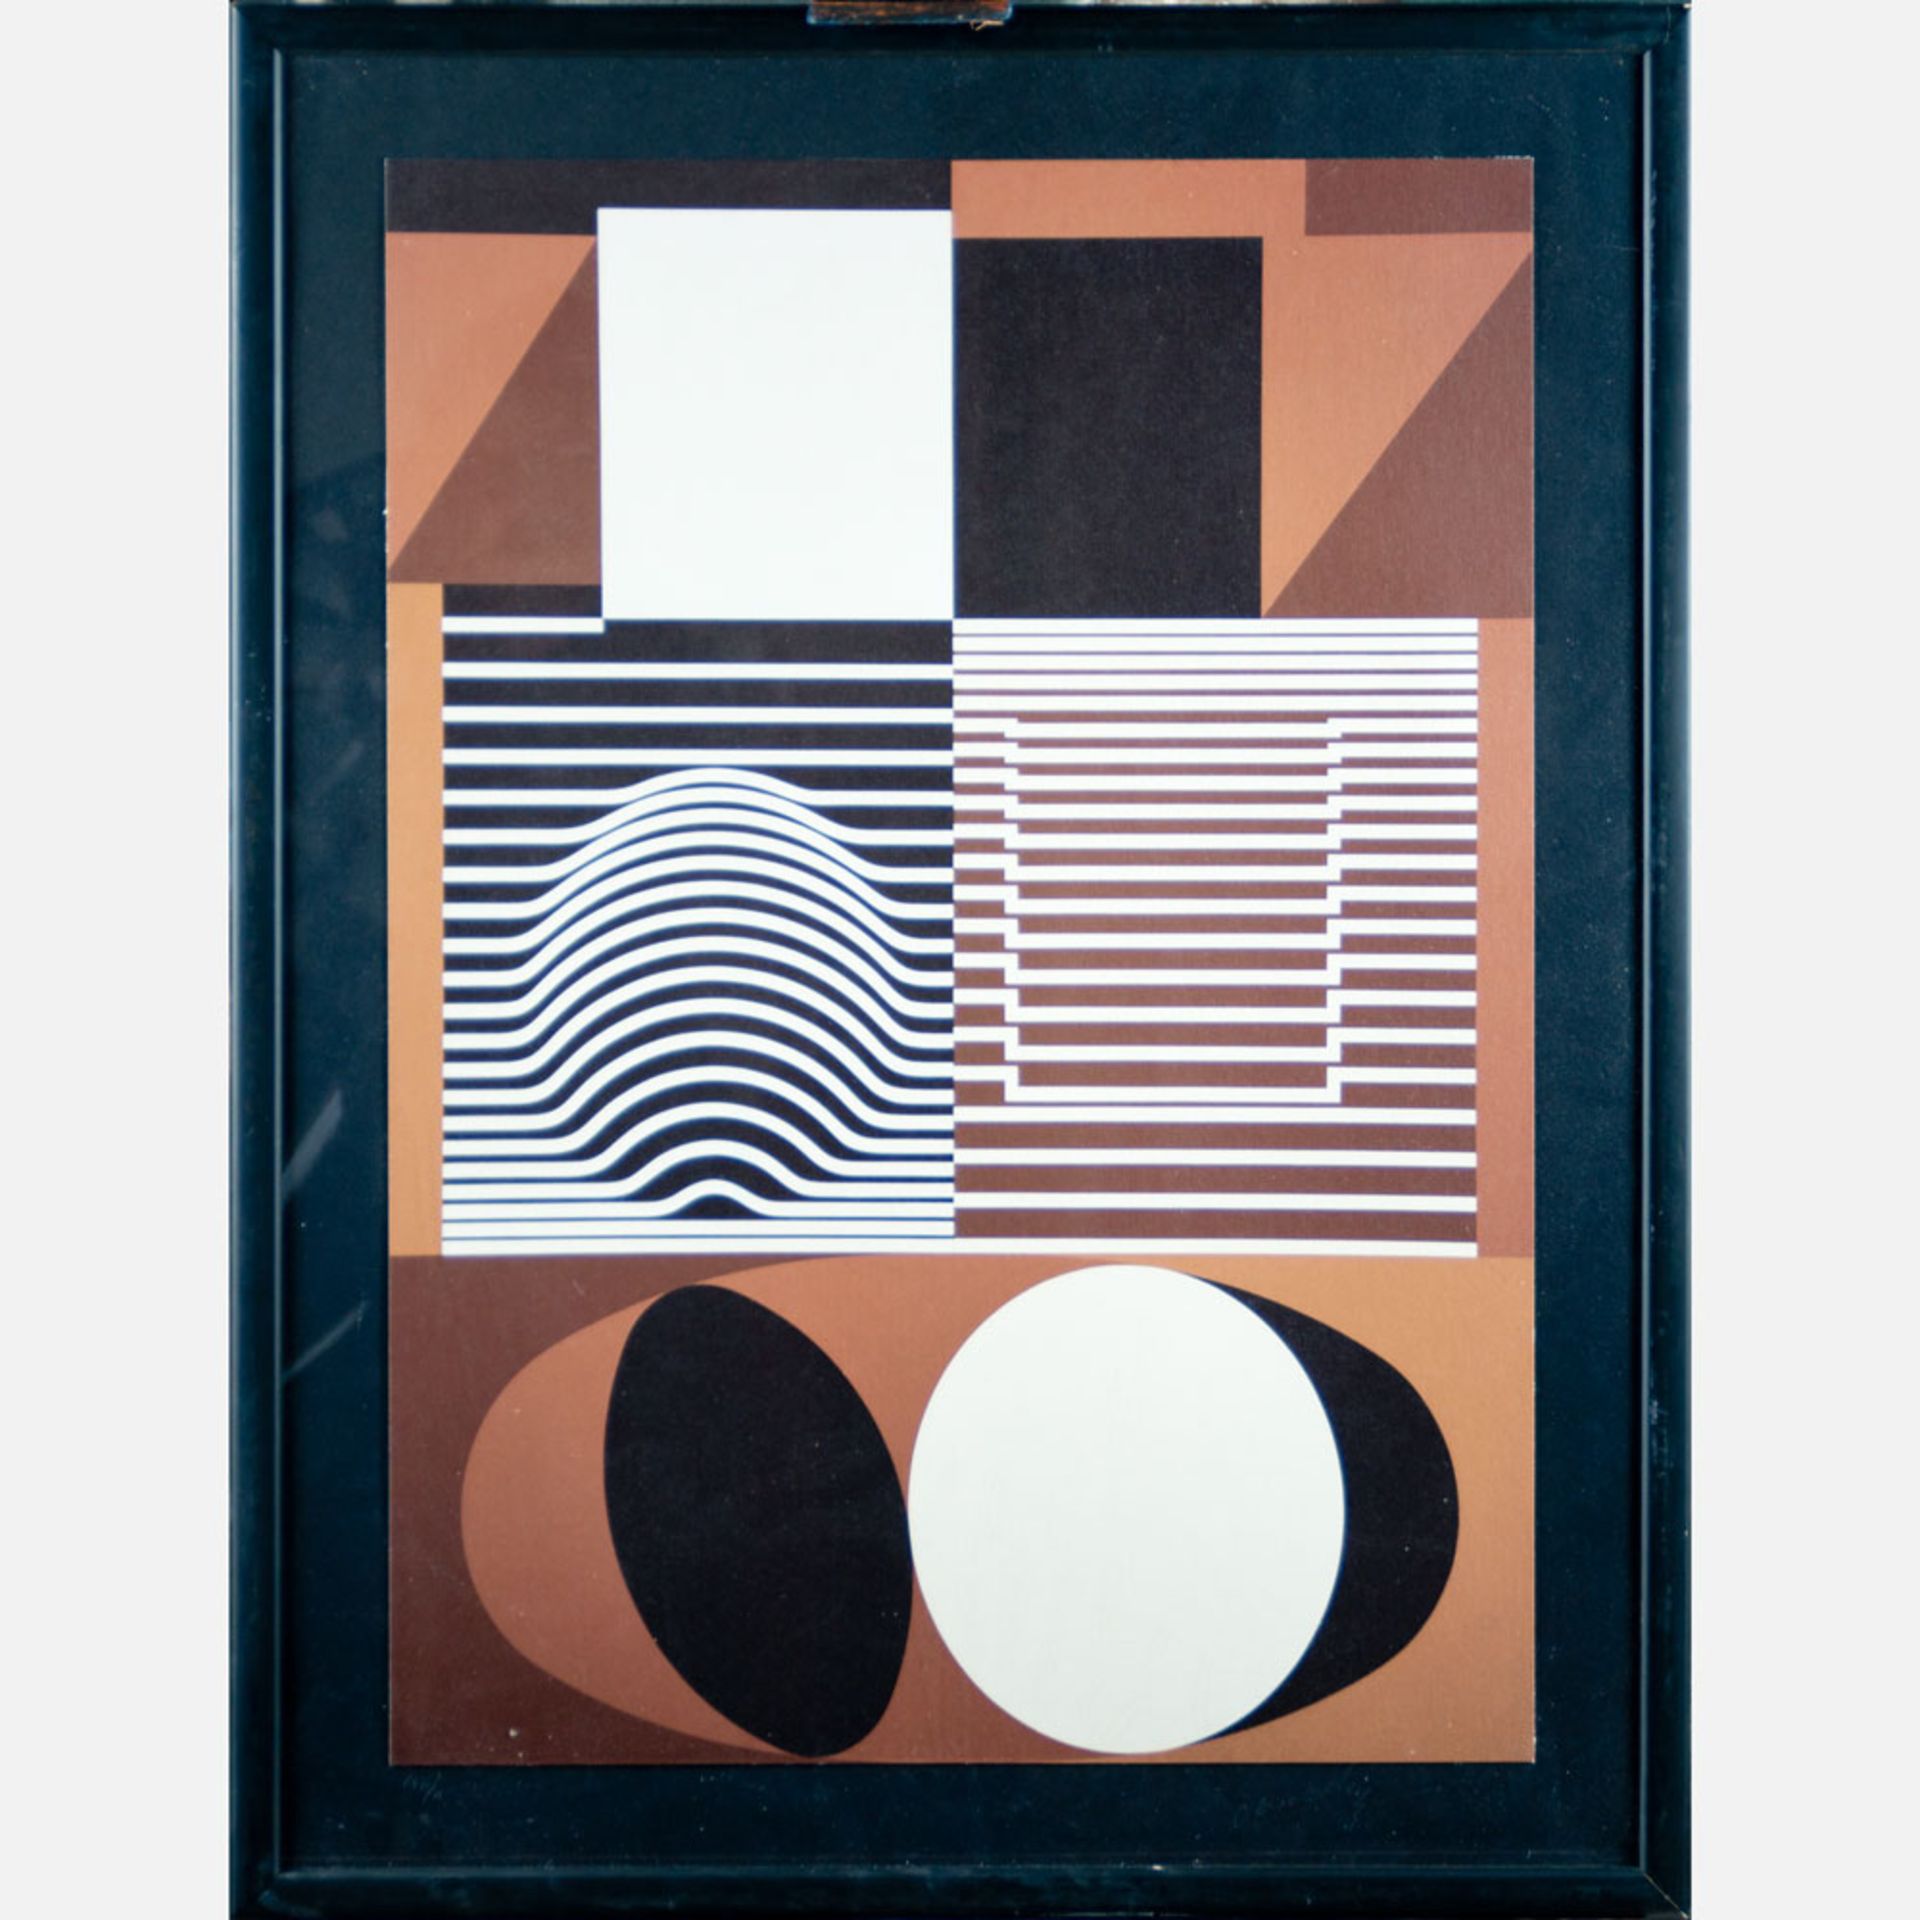 Victor Vasarely (1906-1997) - Graphic - Image 2 of 3